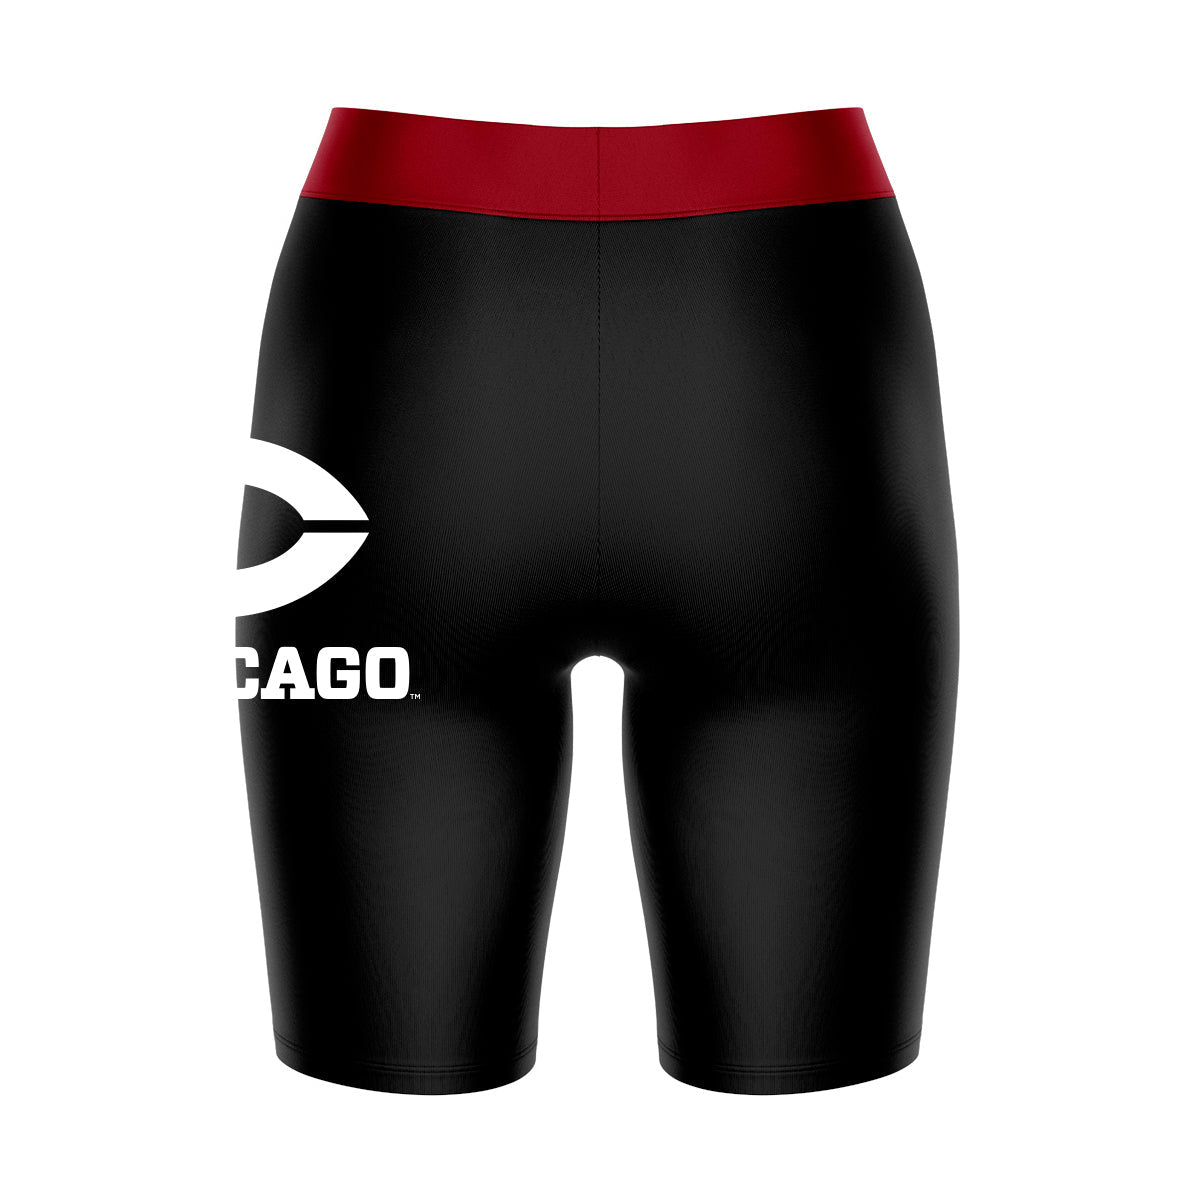 UChicago Maroon Vive La Fete Game Day Logo on Thigh and Waistband Black and Maroon Women Bike Short 9 Inseam"